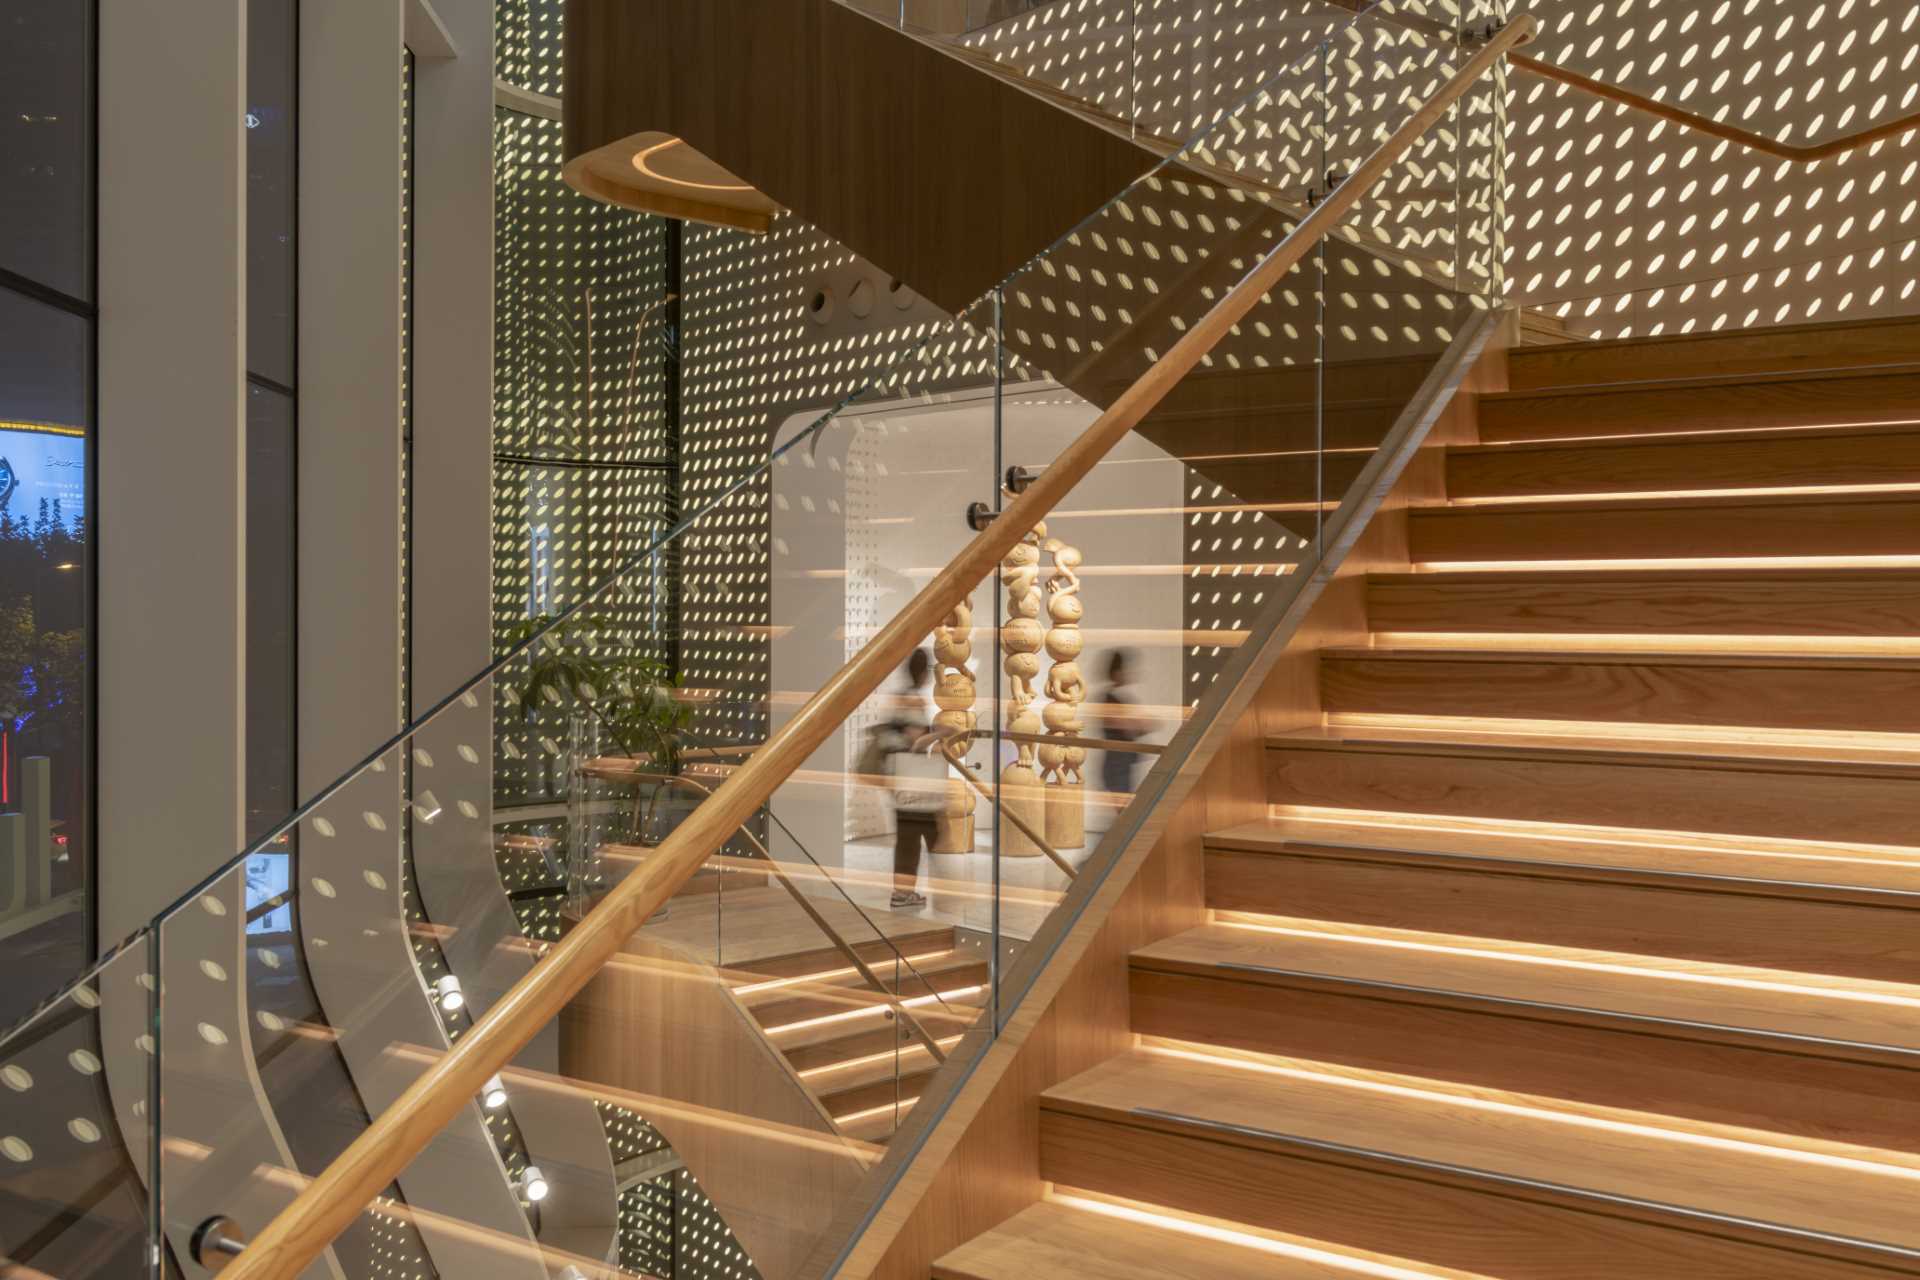 A modern Lululemon flag،p store has curved and patterned walls with a large staircase that connects the multiple floors.